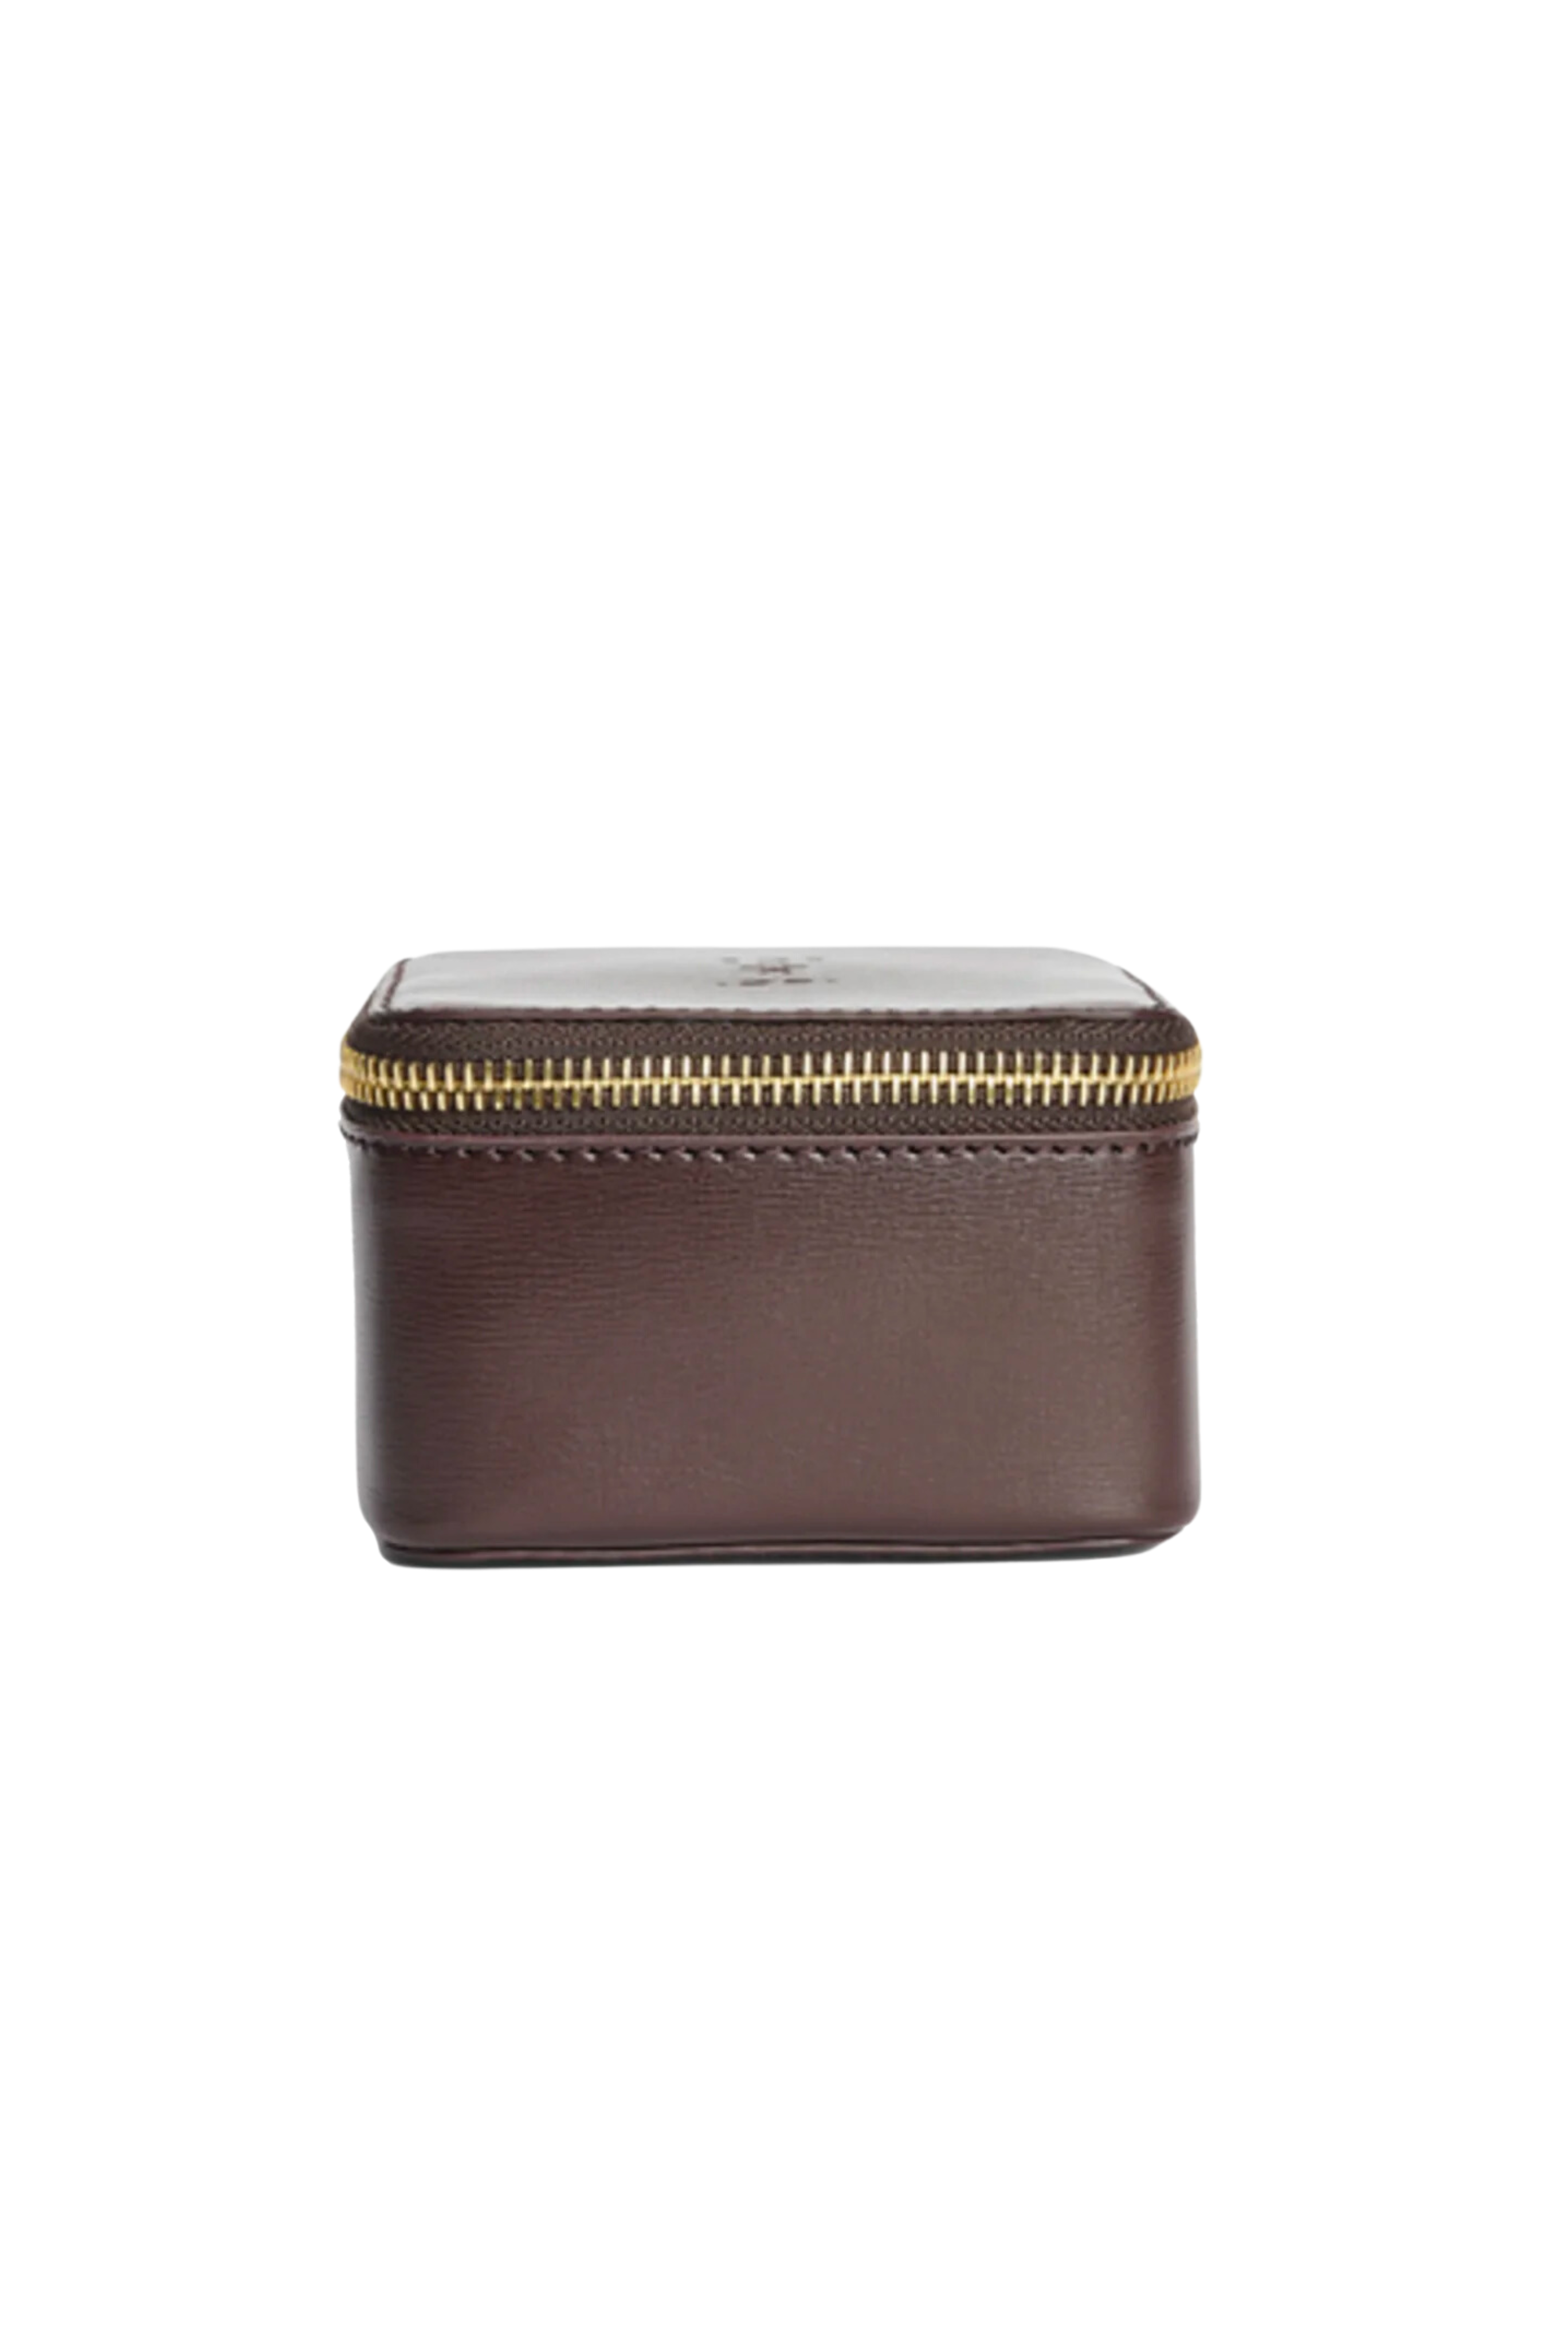 BY MALENE BIRGER Aya Small Brown Leather Jewelry Case